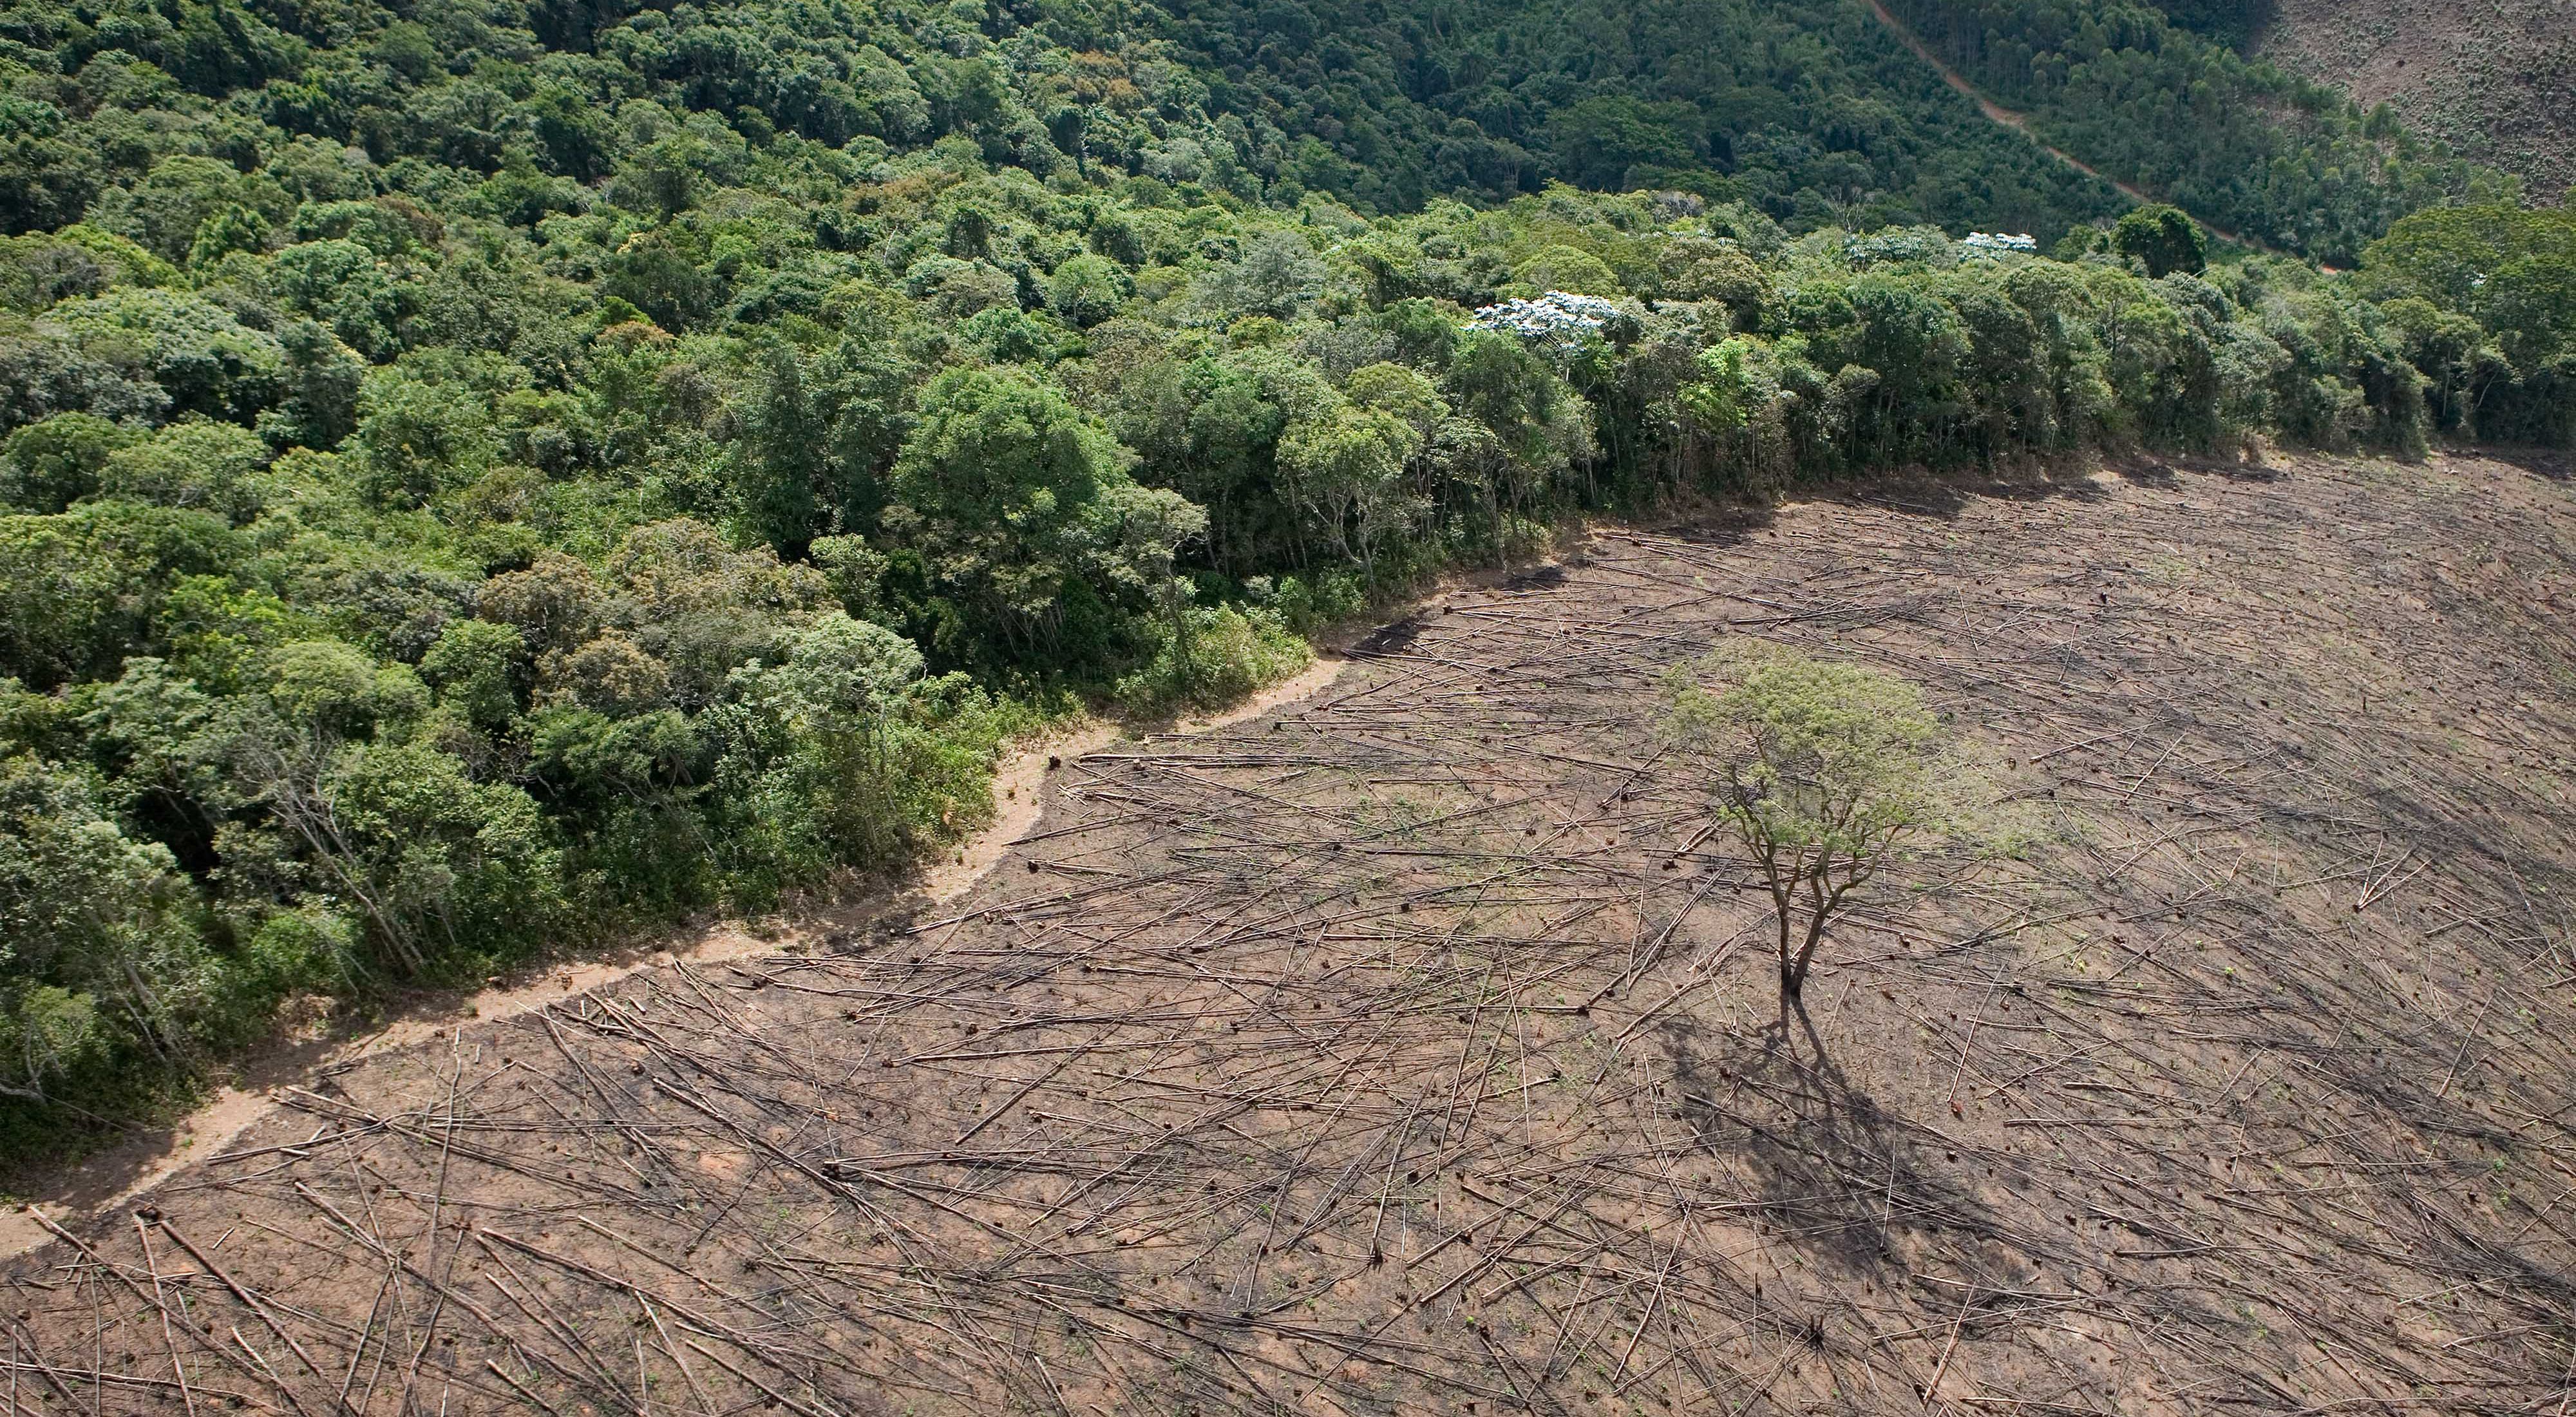 Aerial view of timber cutting in Brazil showing clear cut land next to a forest.